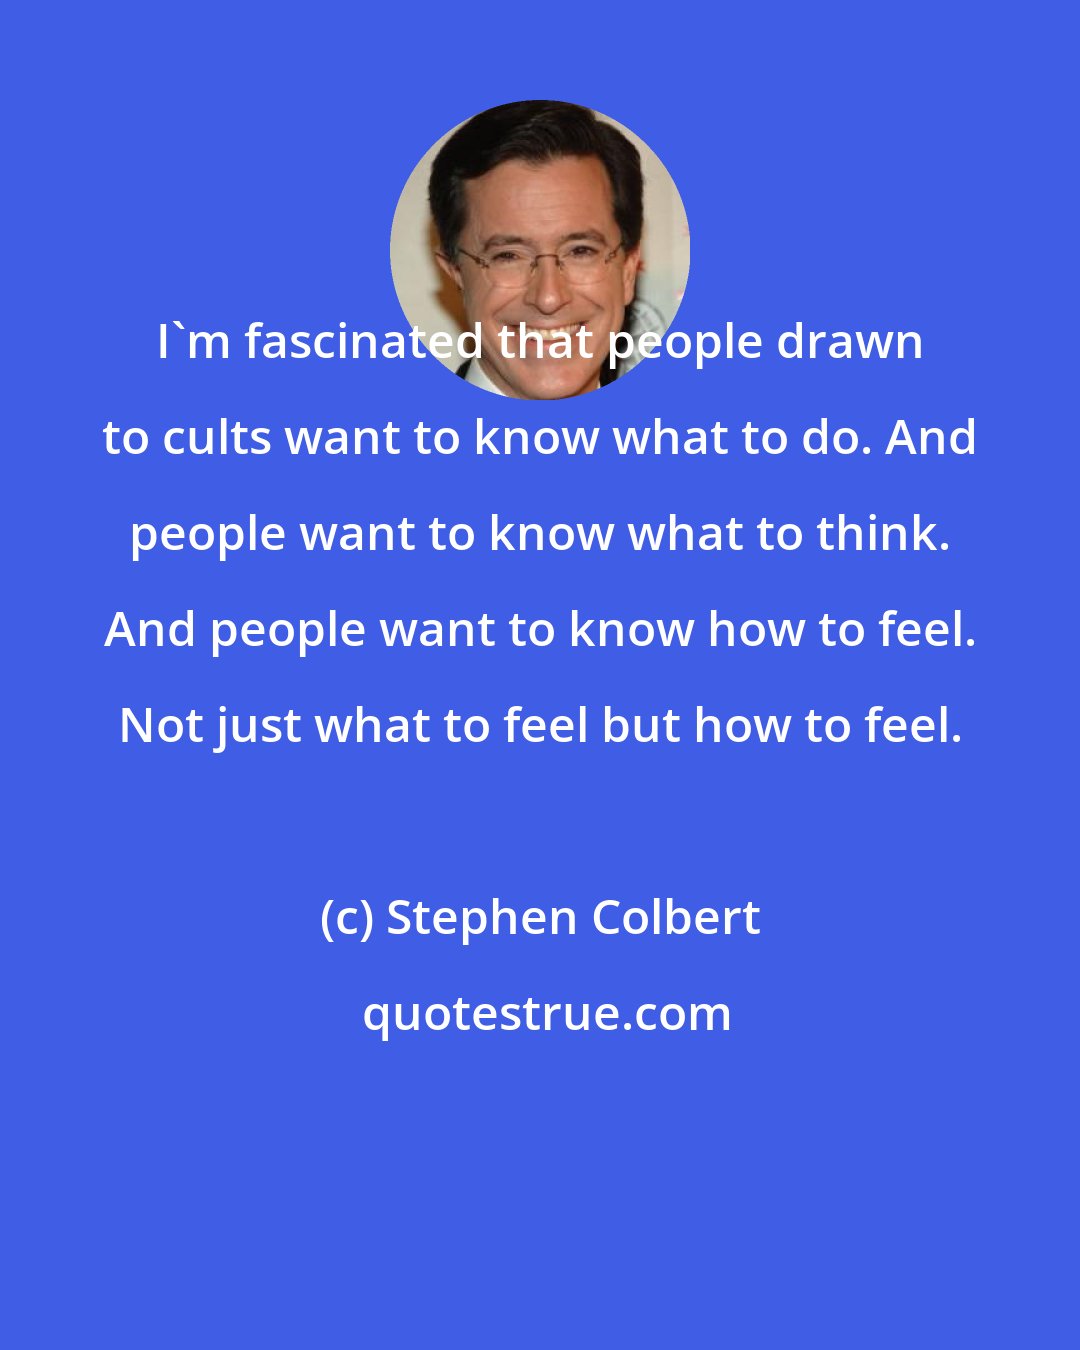 Stephen Colbert: I'm fascinated that people drawn to cults want to know what to do. And people want to know what to think. And people want to know how to feel. Not just what to feel but how to feel.